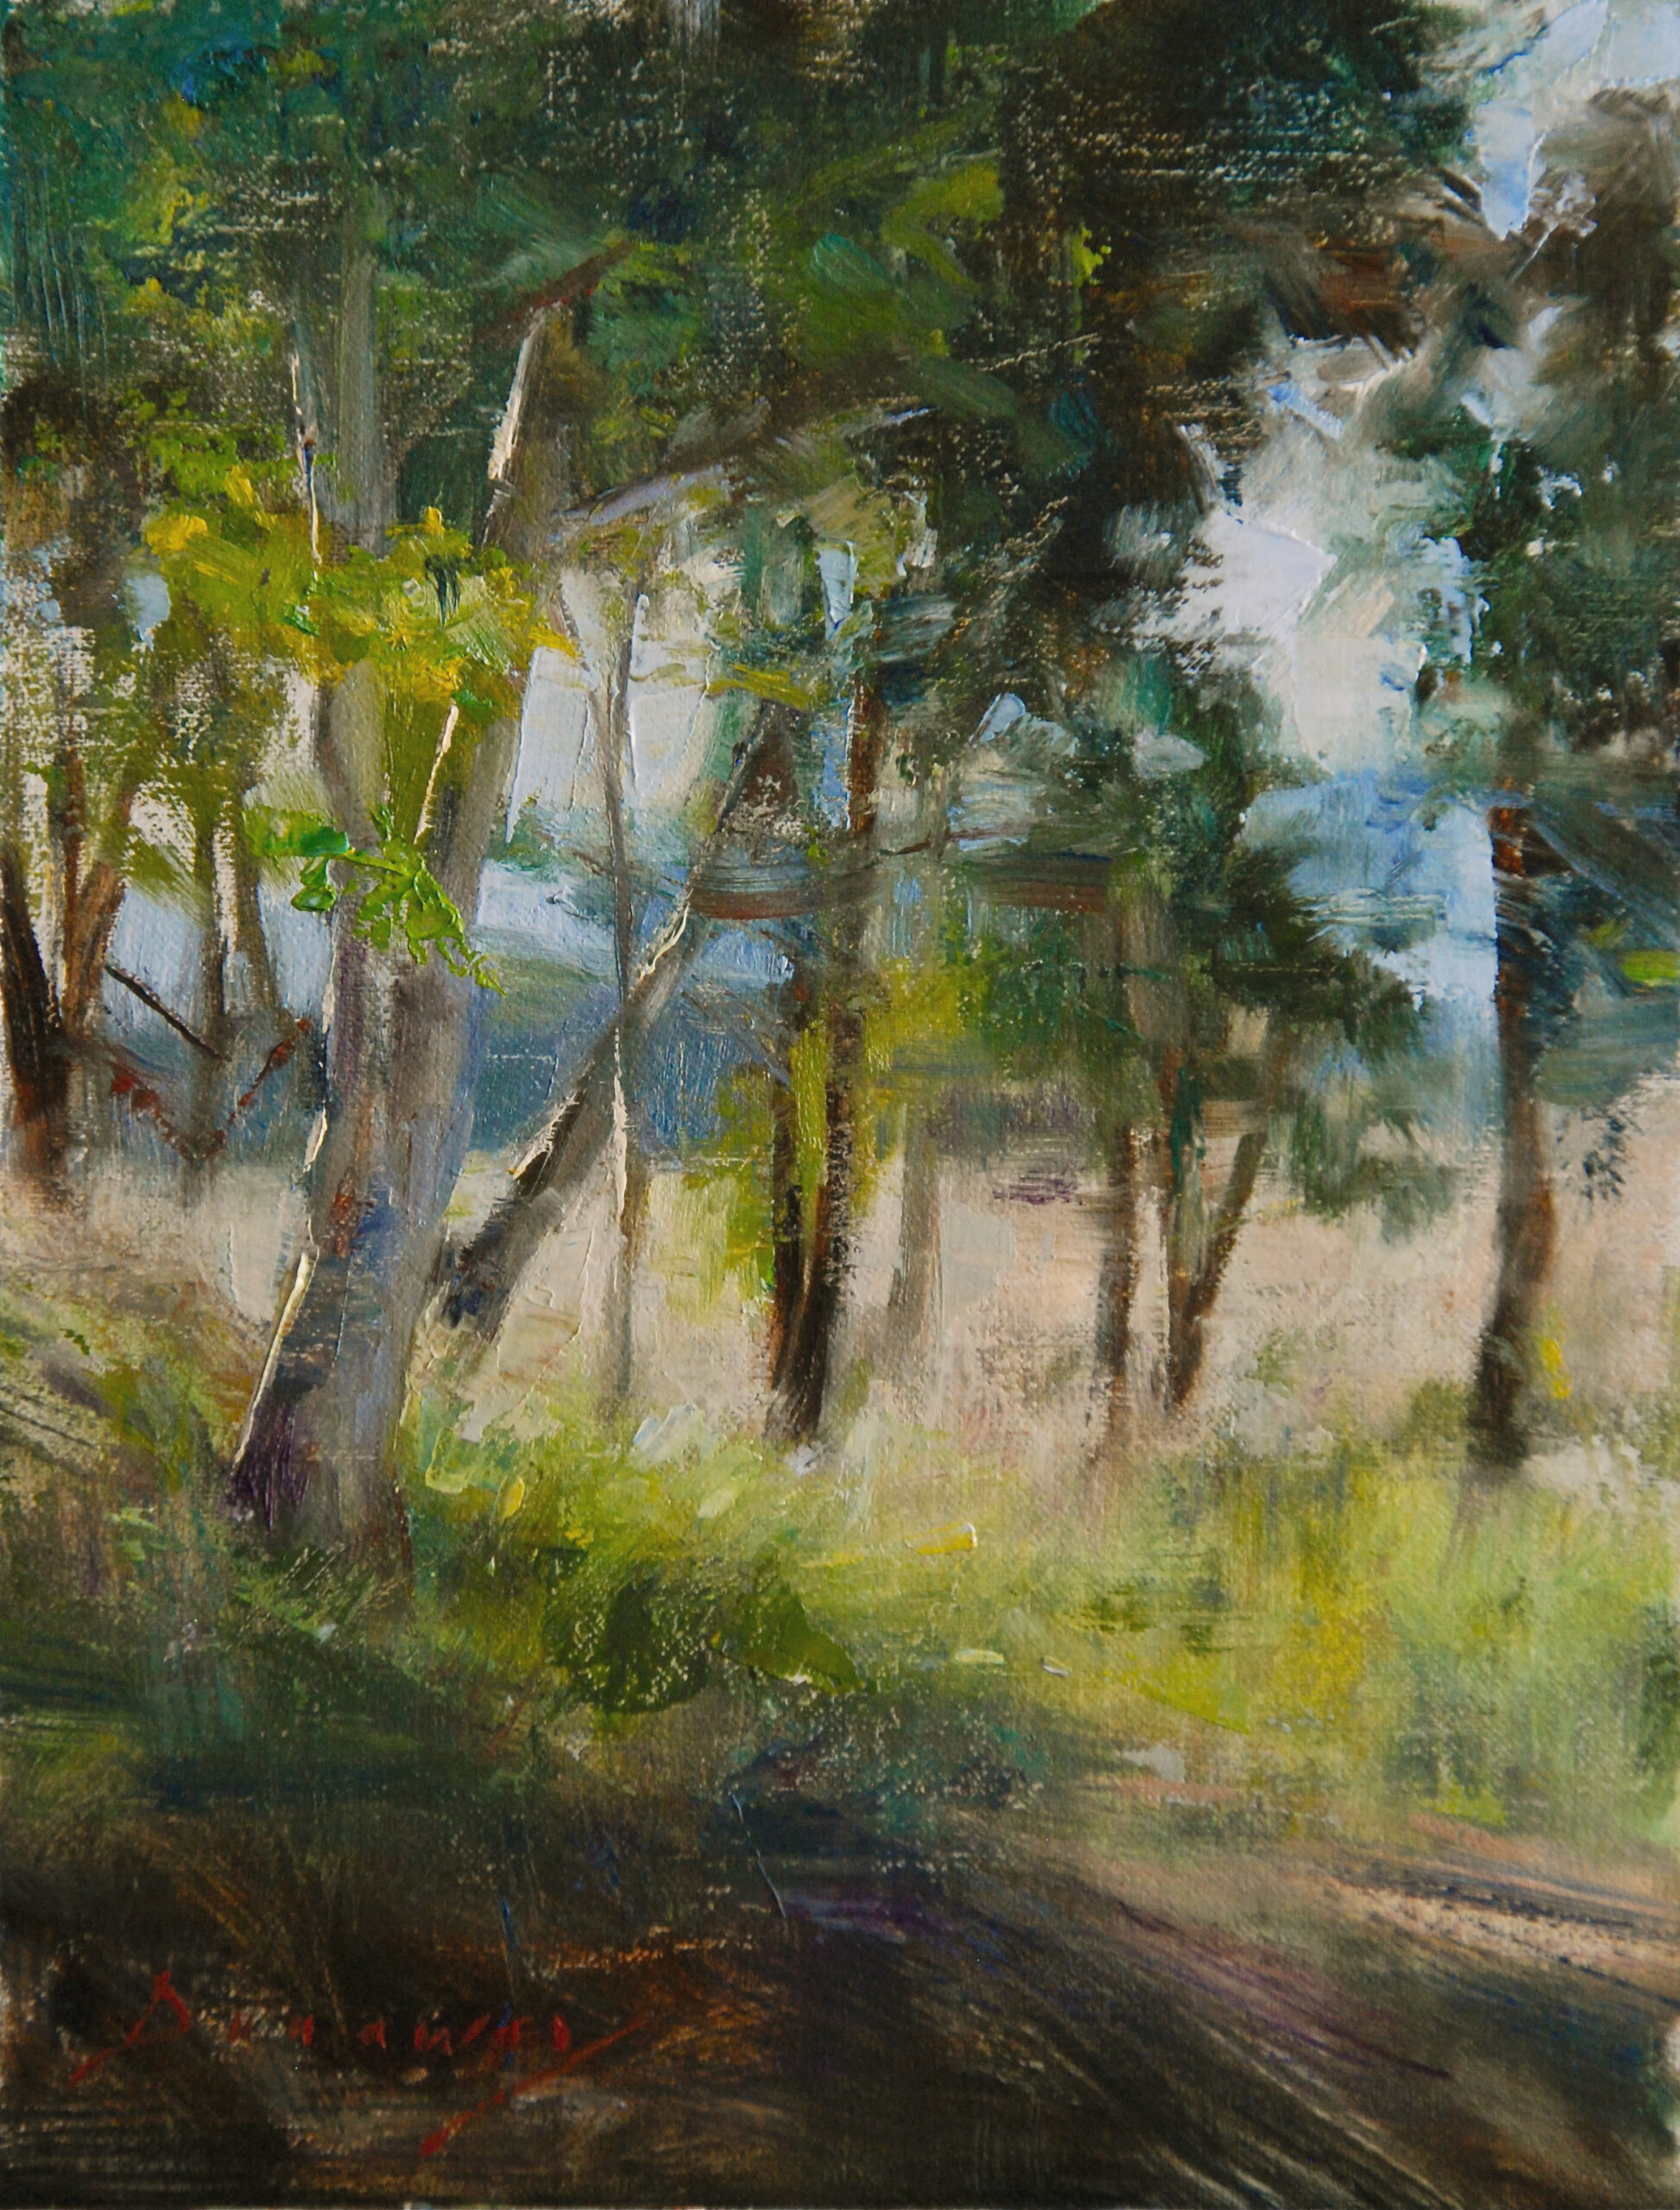 Michelle Dunaway, "Morning Light," 10 x 8 inches, Oil on linen